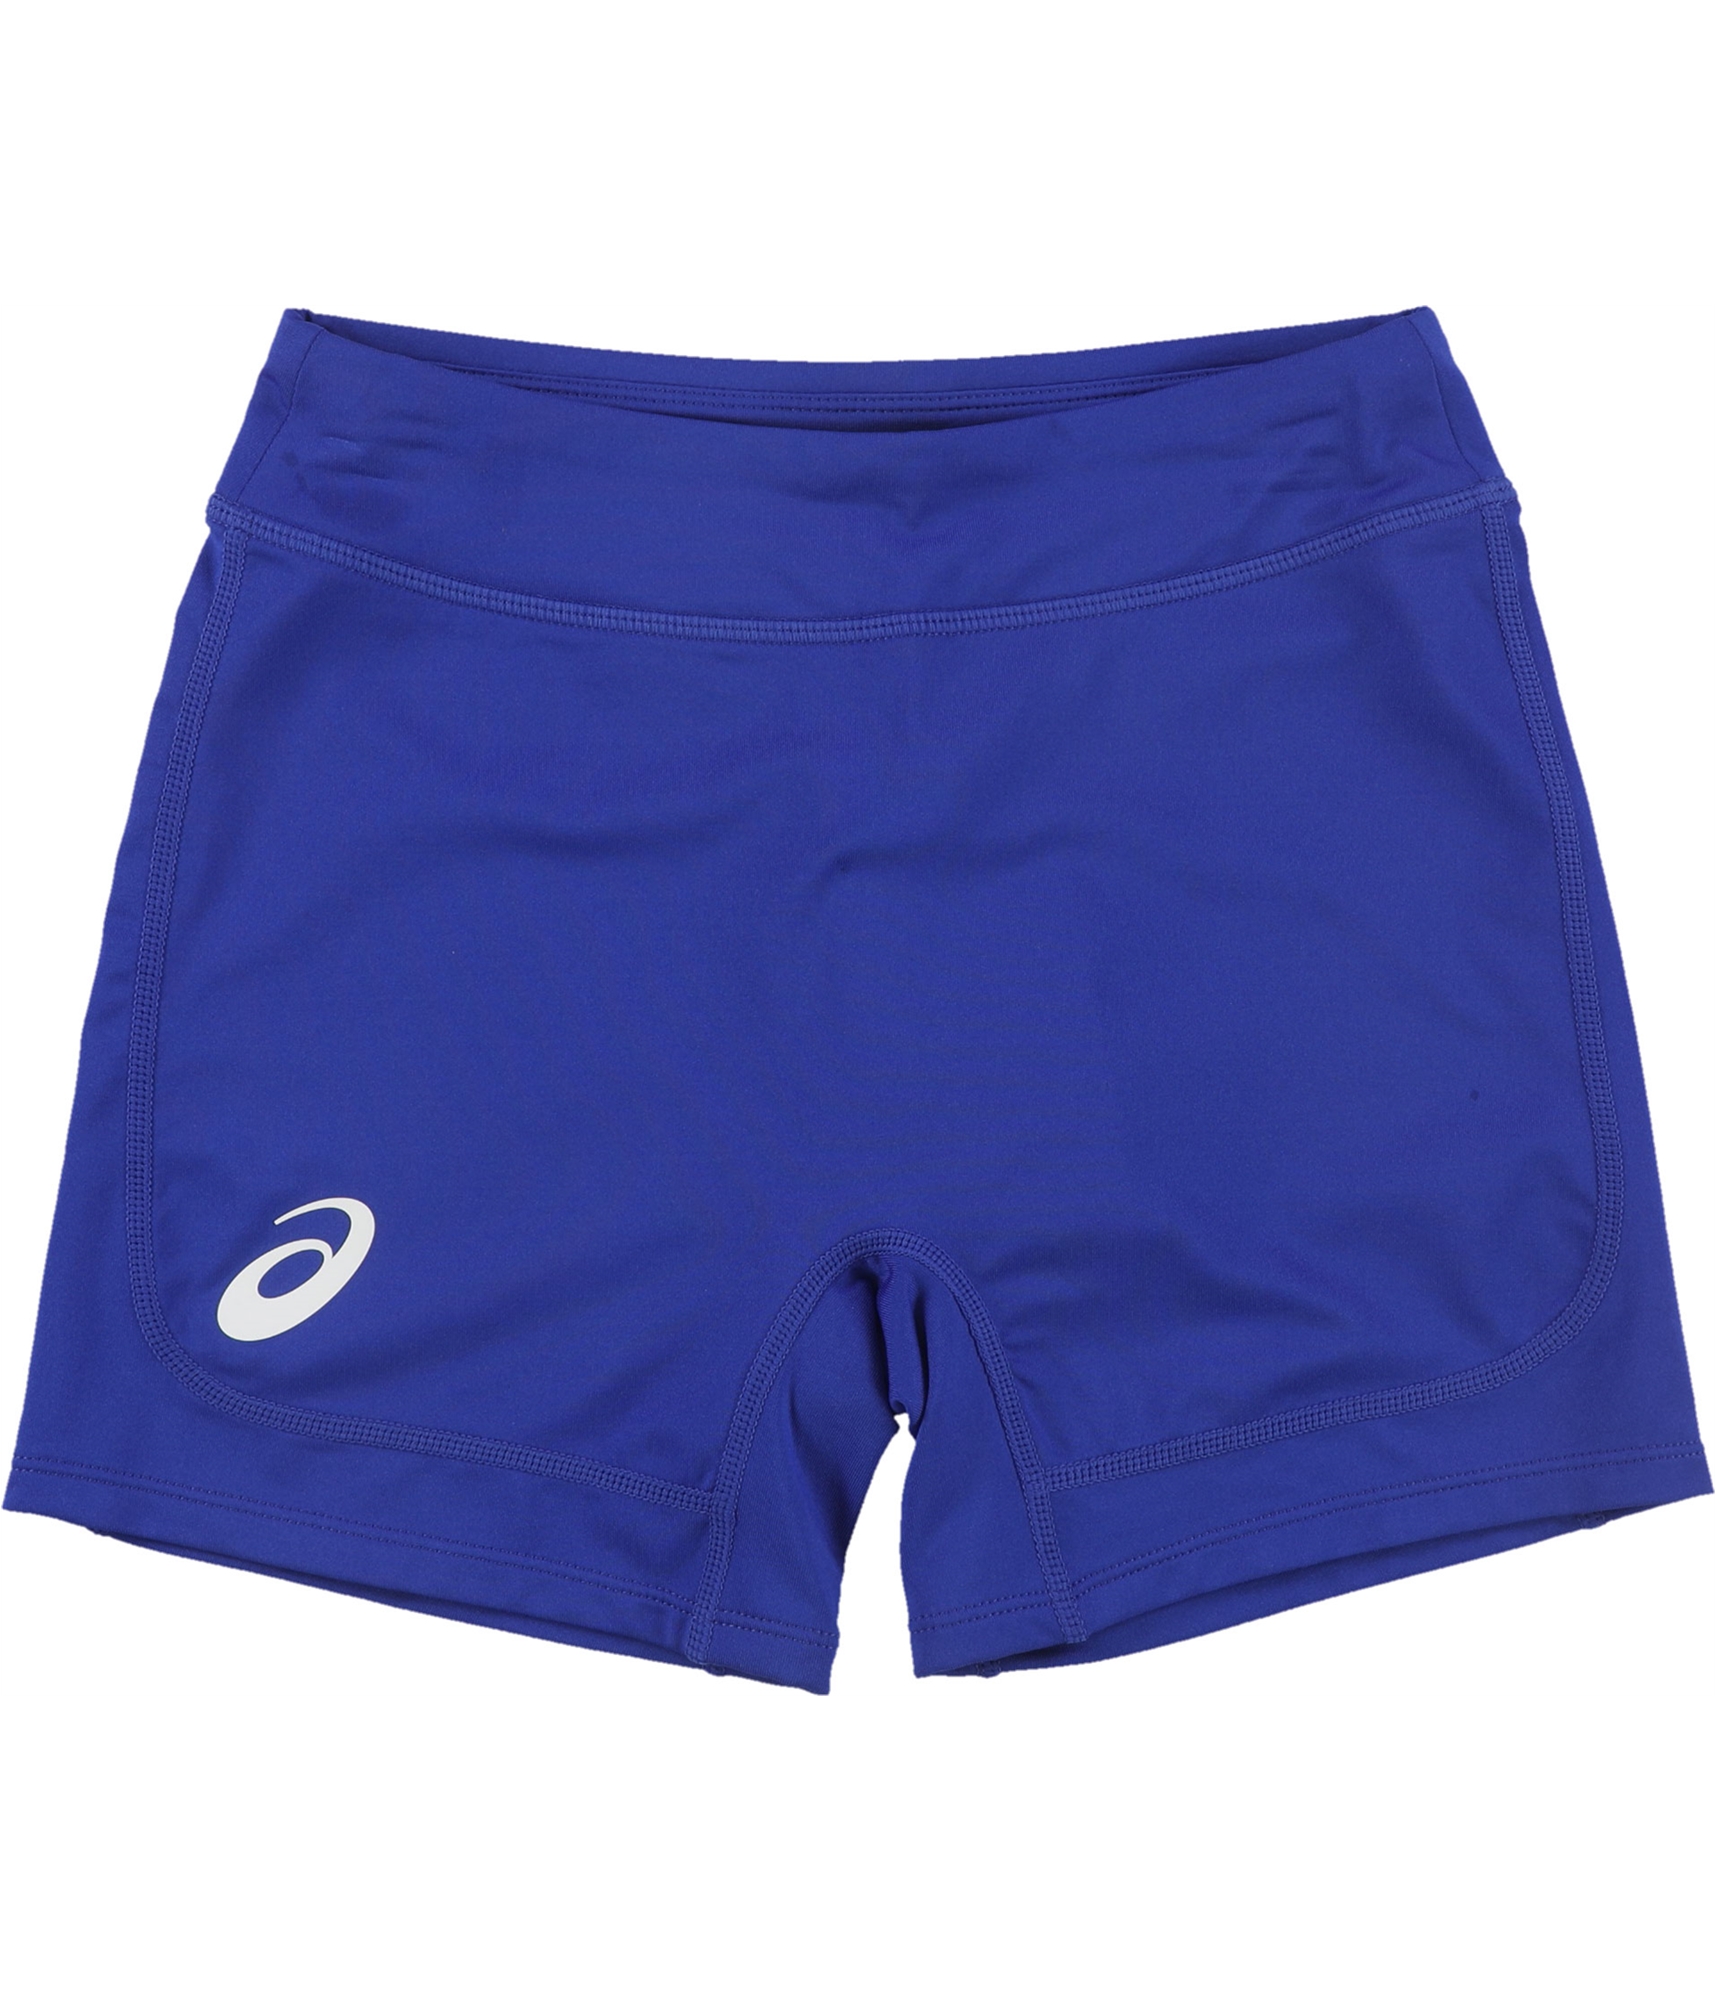 asics 4 inch volleyball shorts Cheap - OFF 69%